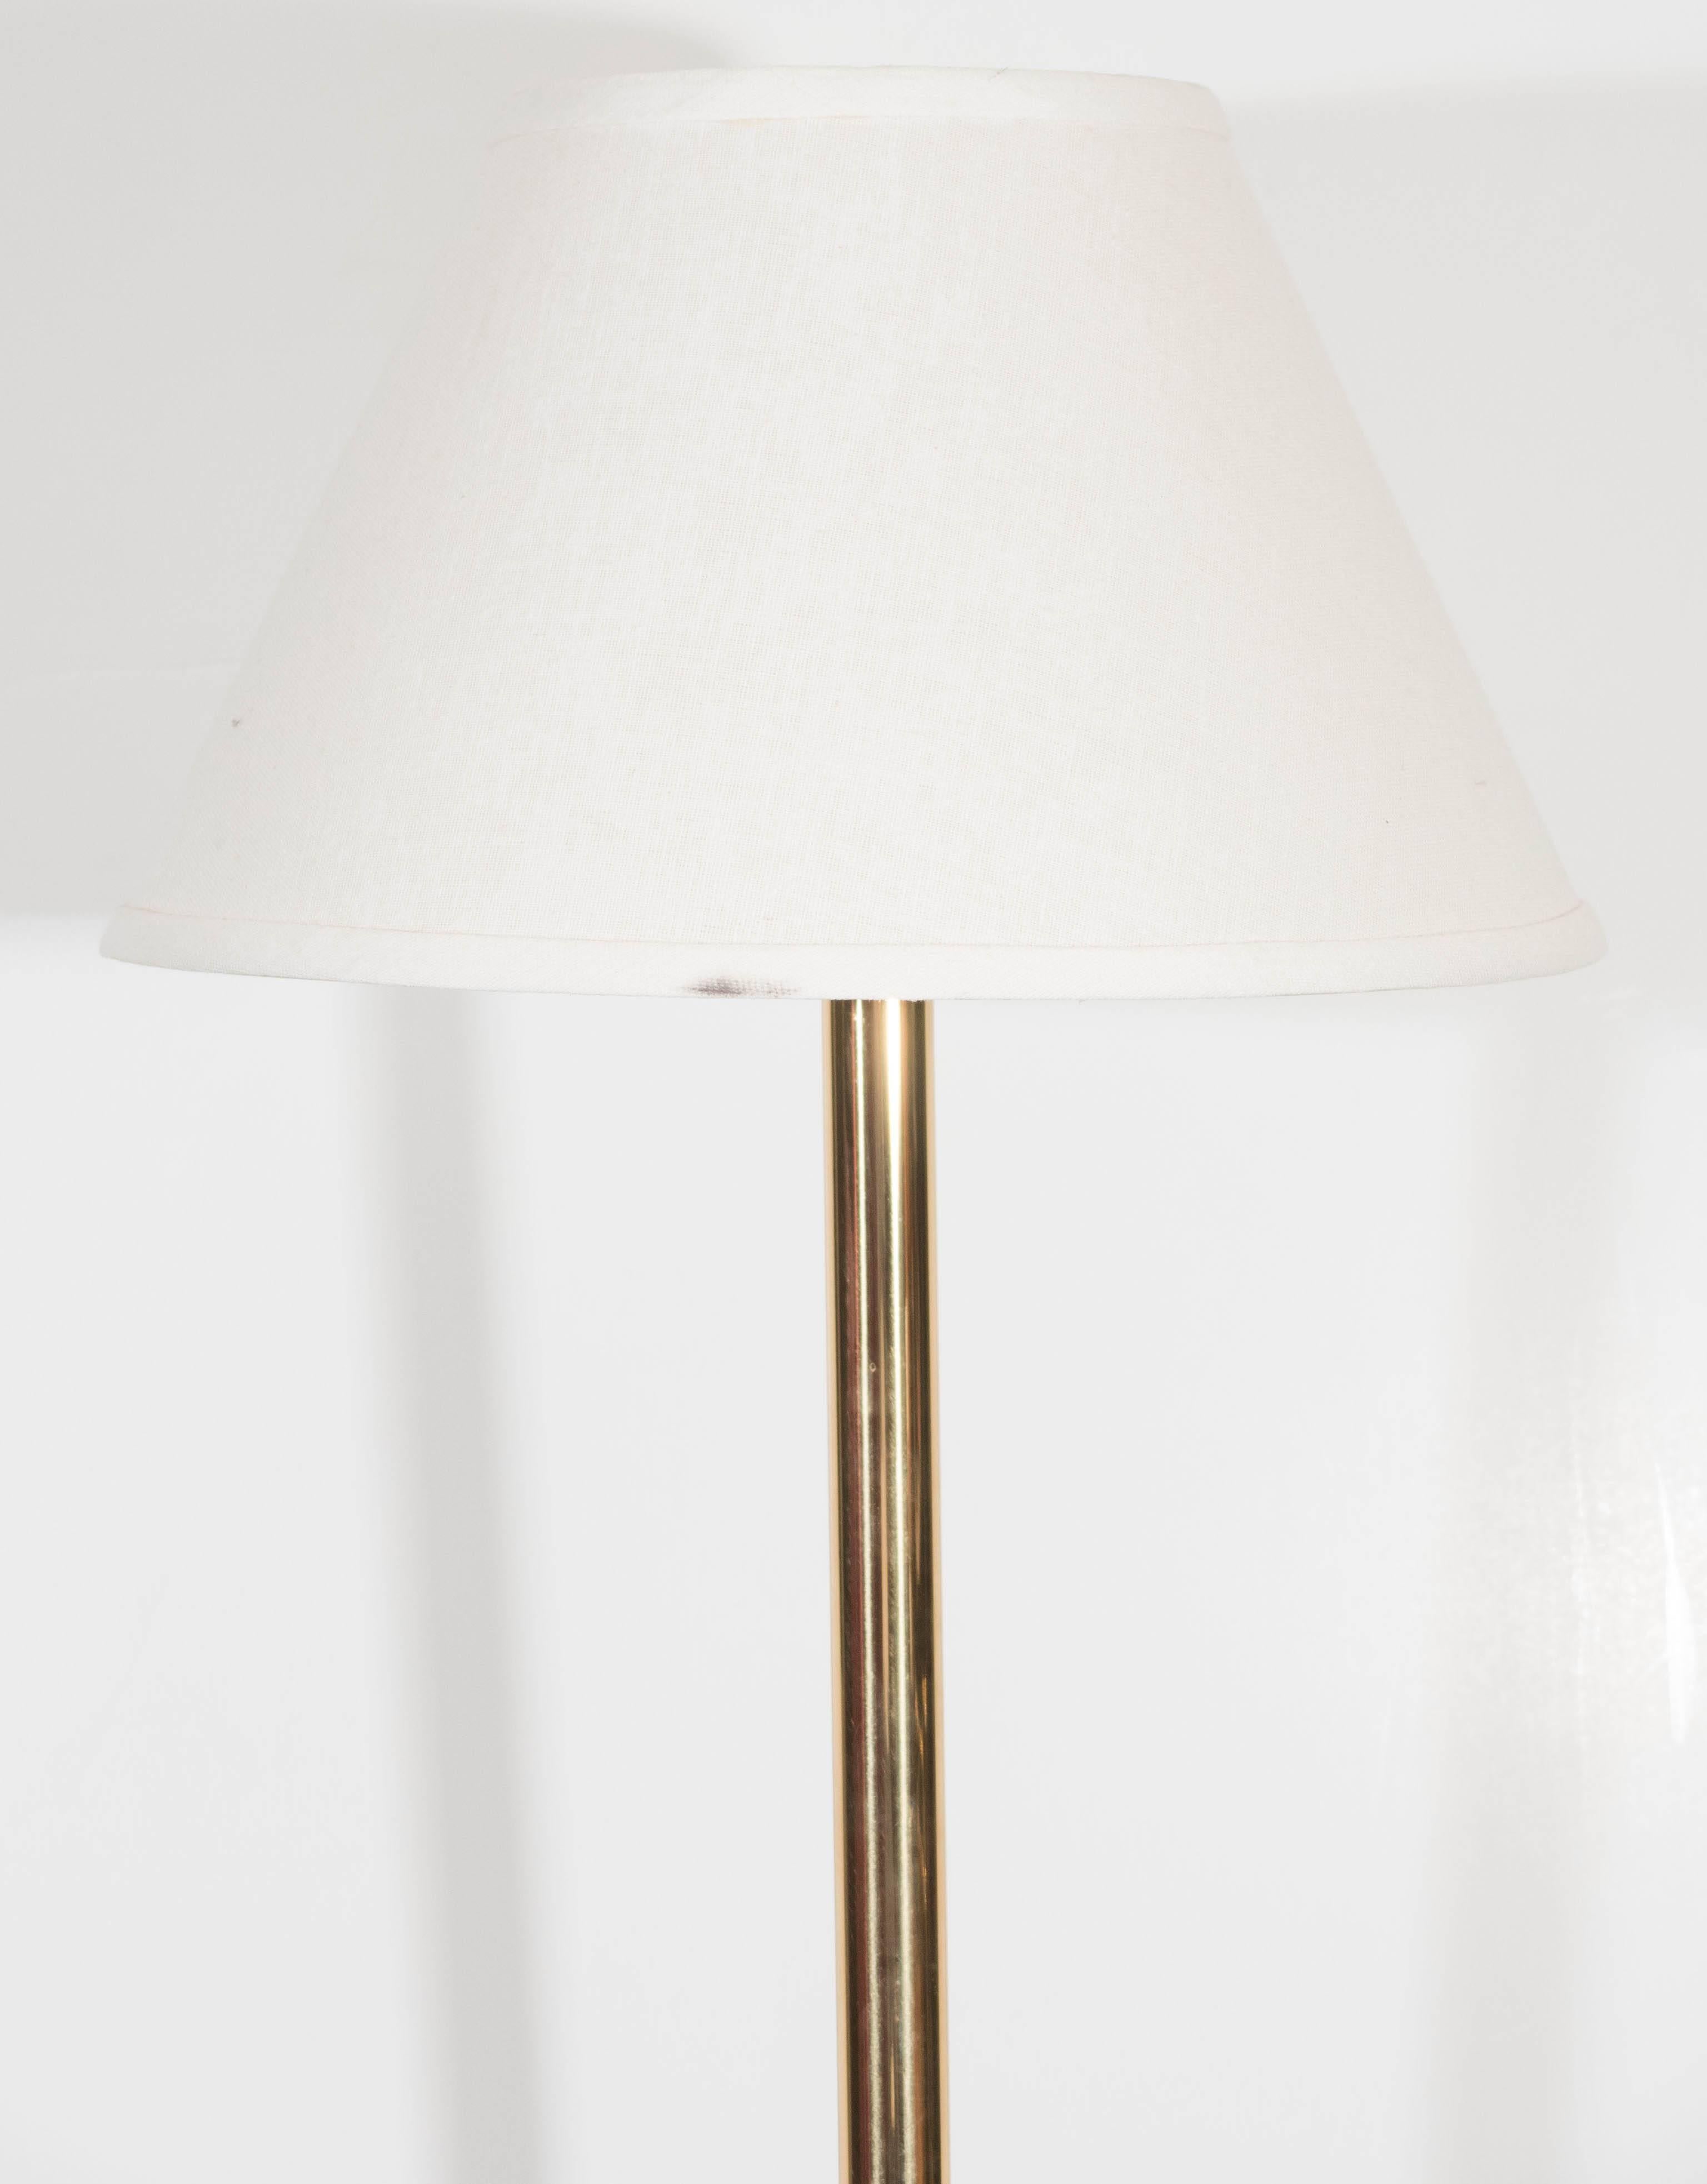 American Casella Brass Floor Lamp with Linen Shade